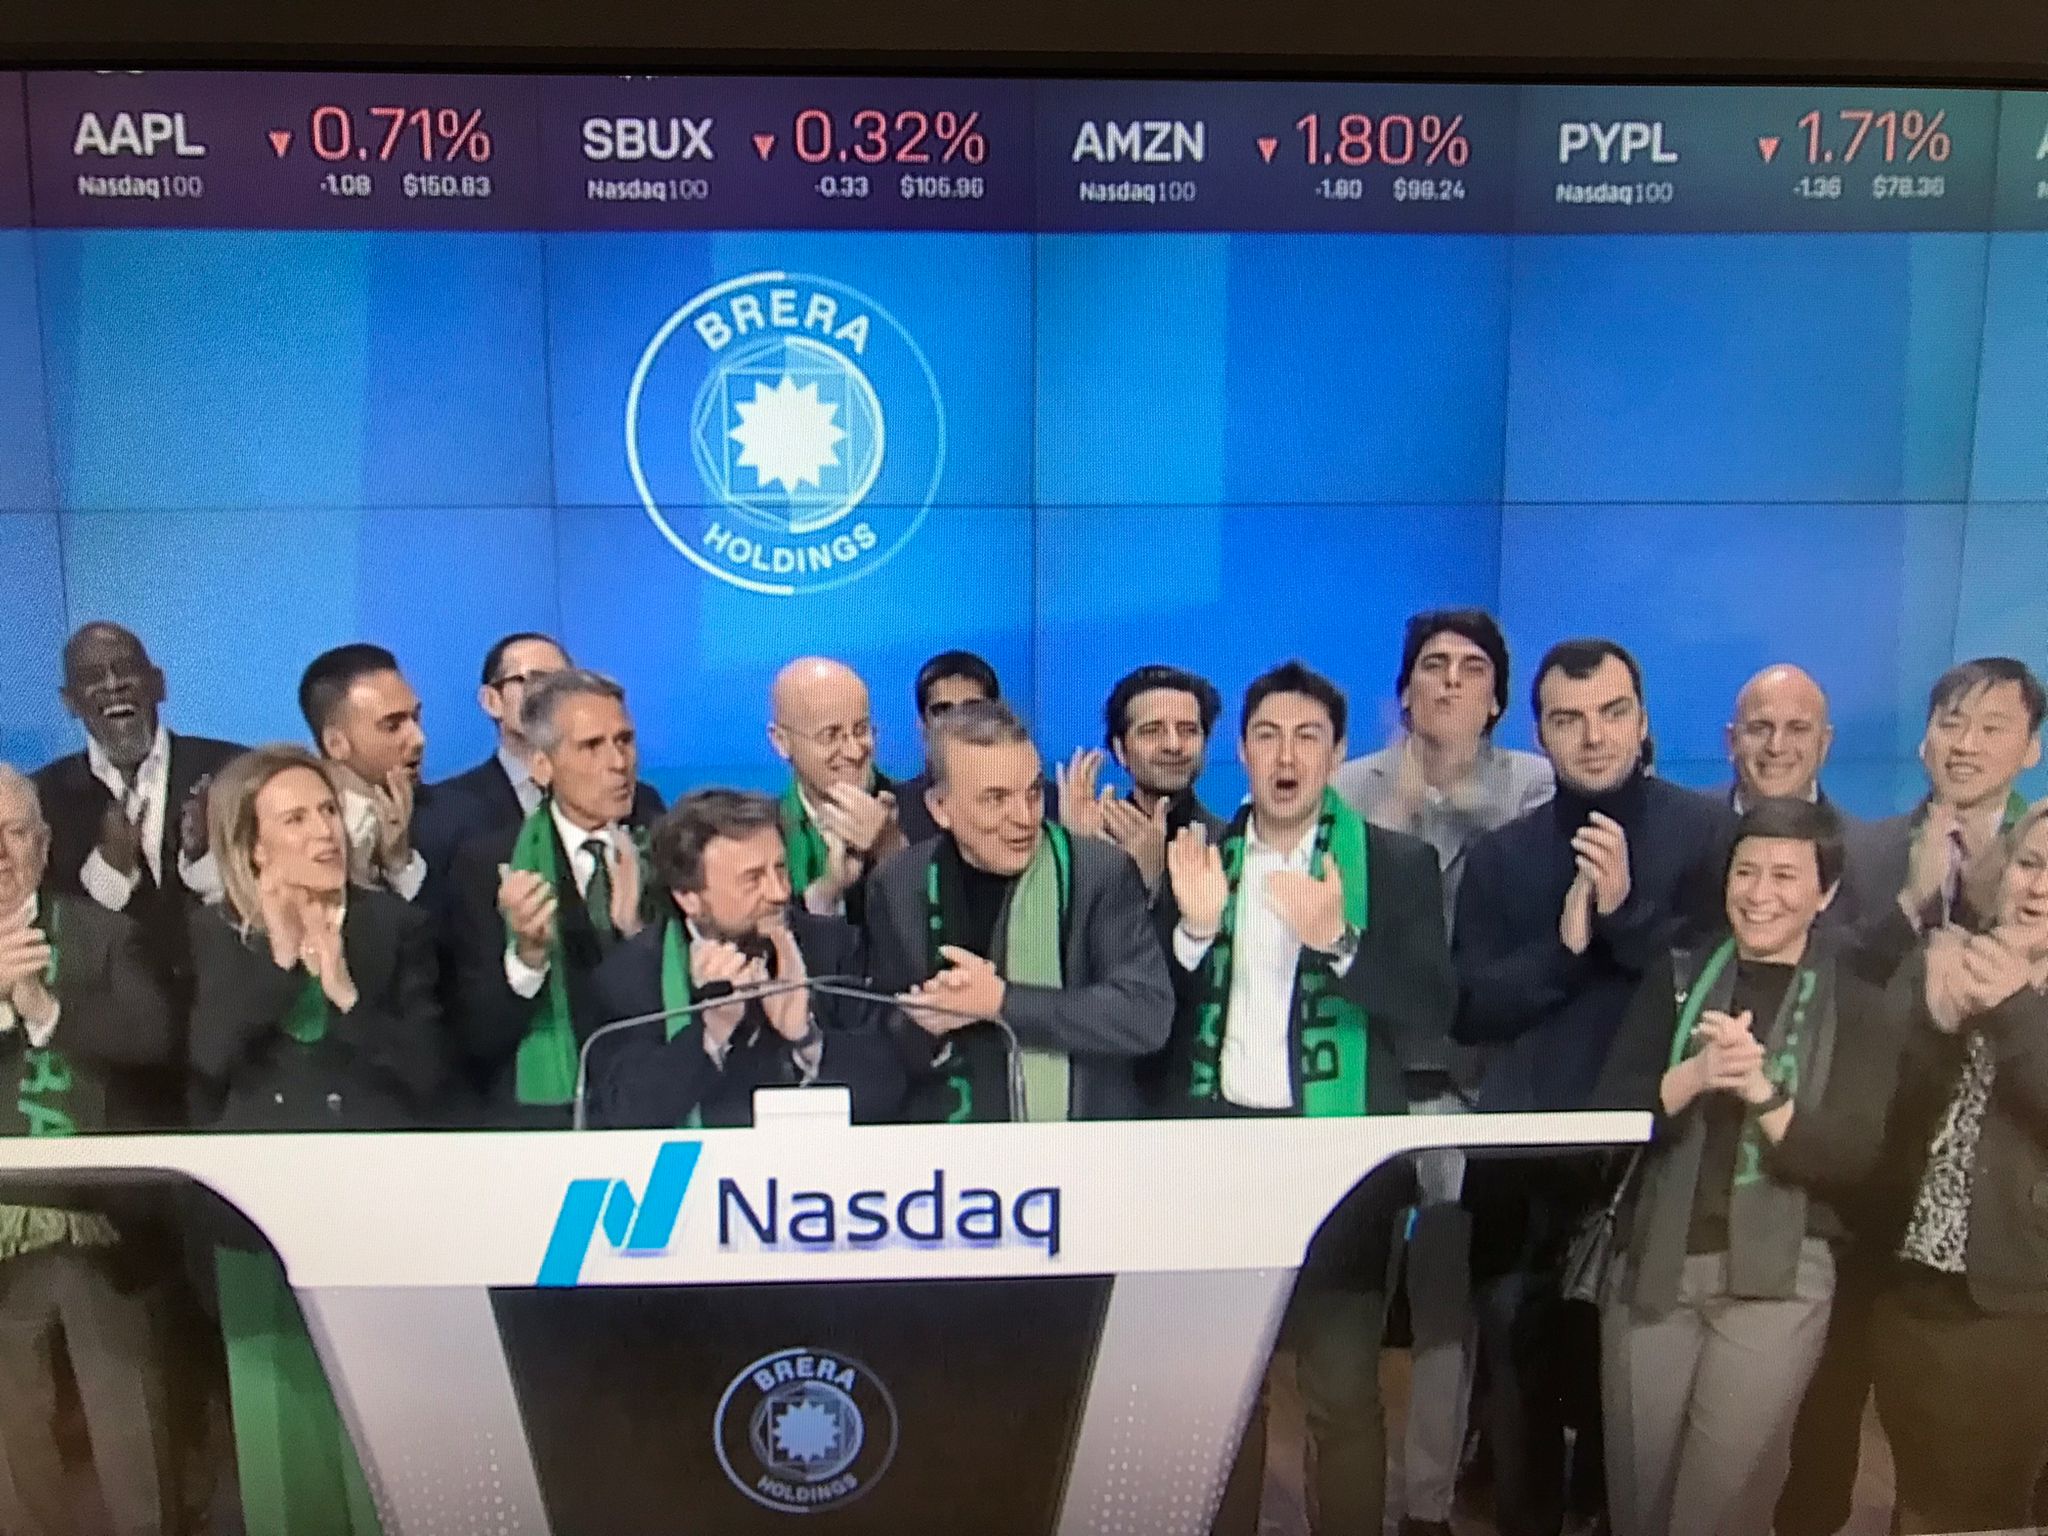 Brera Holdings PLC Celebrates its $7,500,000 IPO with Nasdaq Closing Bell Ceremony on February 9, 2023 in New York's Time Square